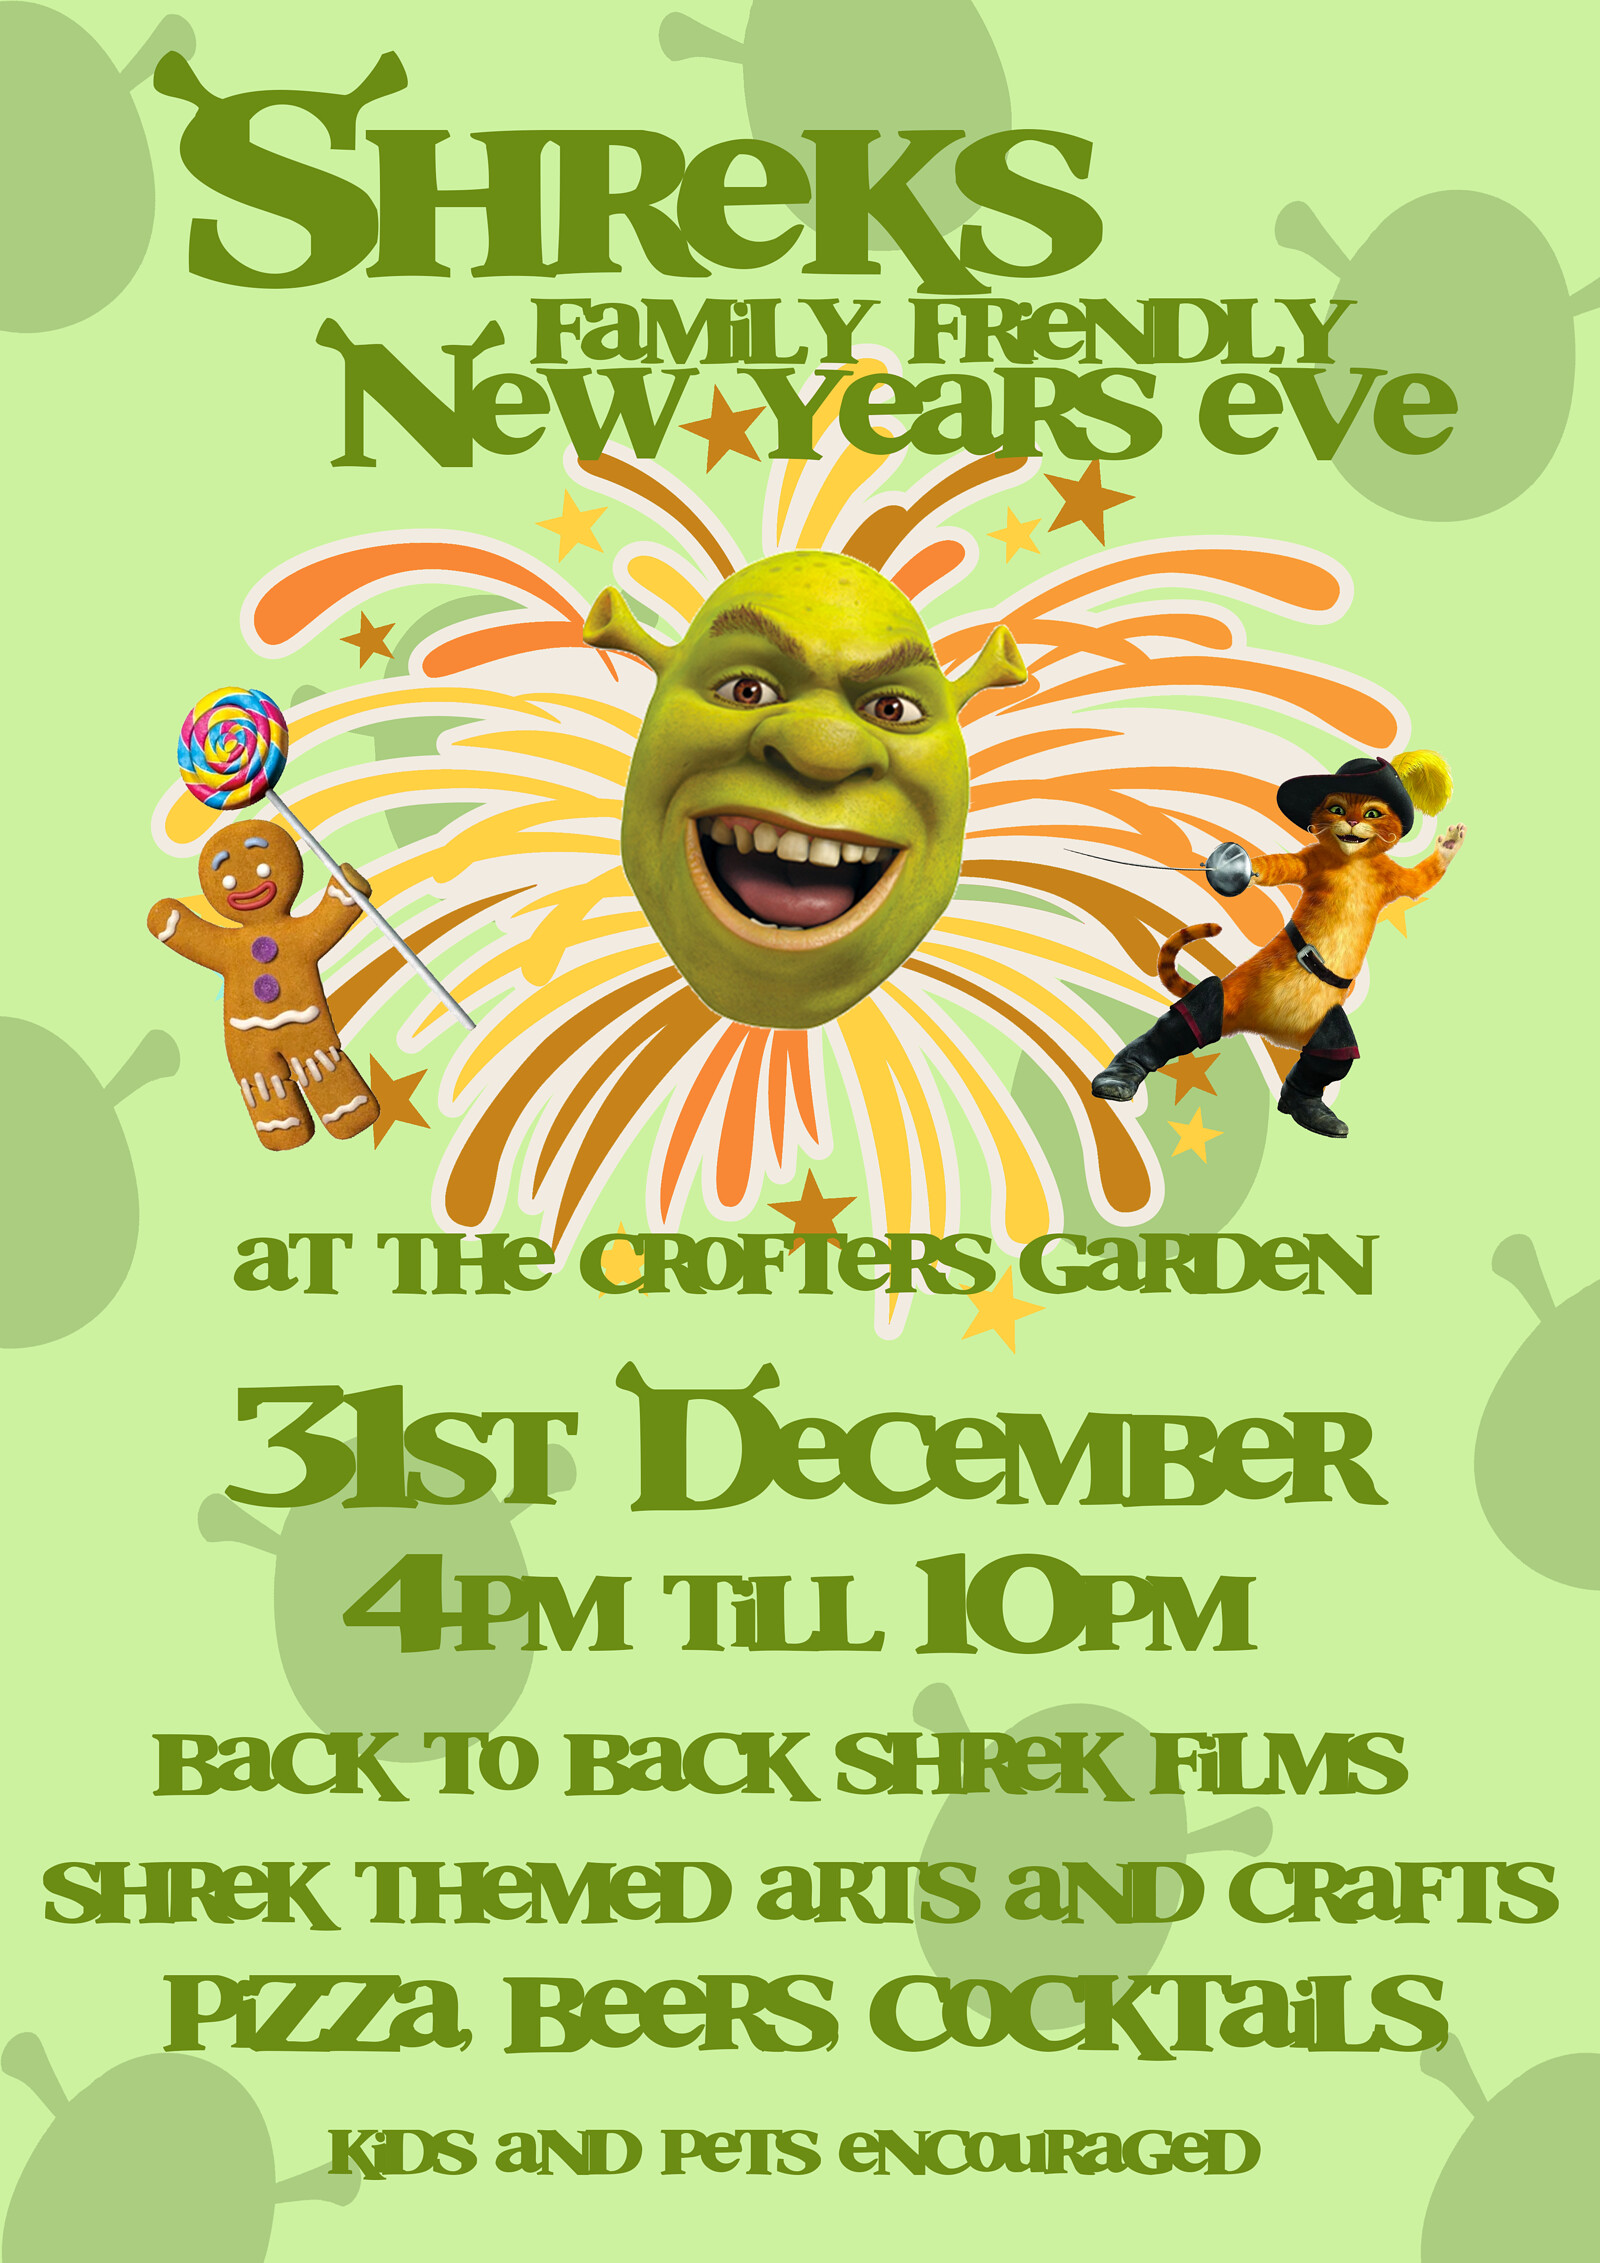 Shrek's Family Friendly New Years Eve - Free Entry at Crofters Garden